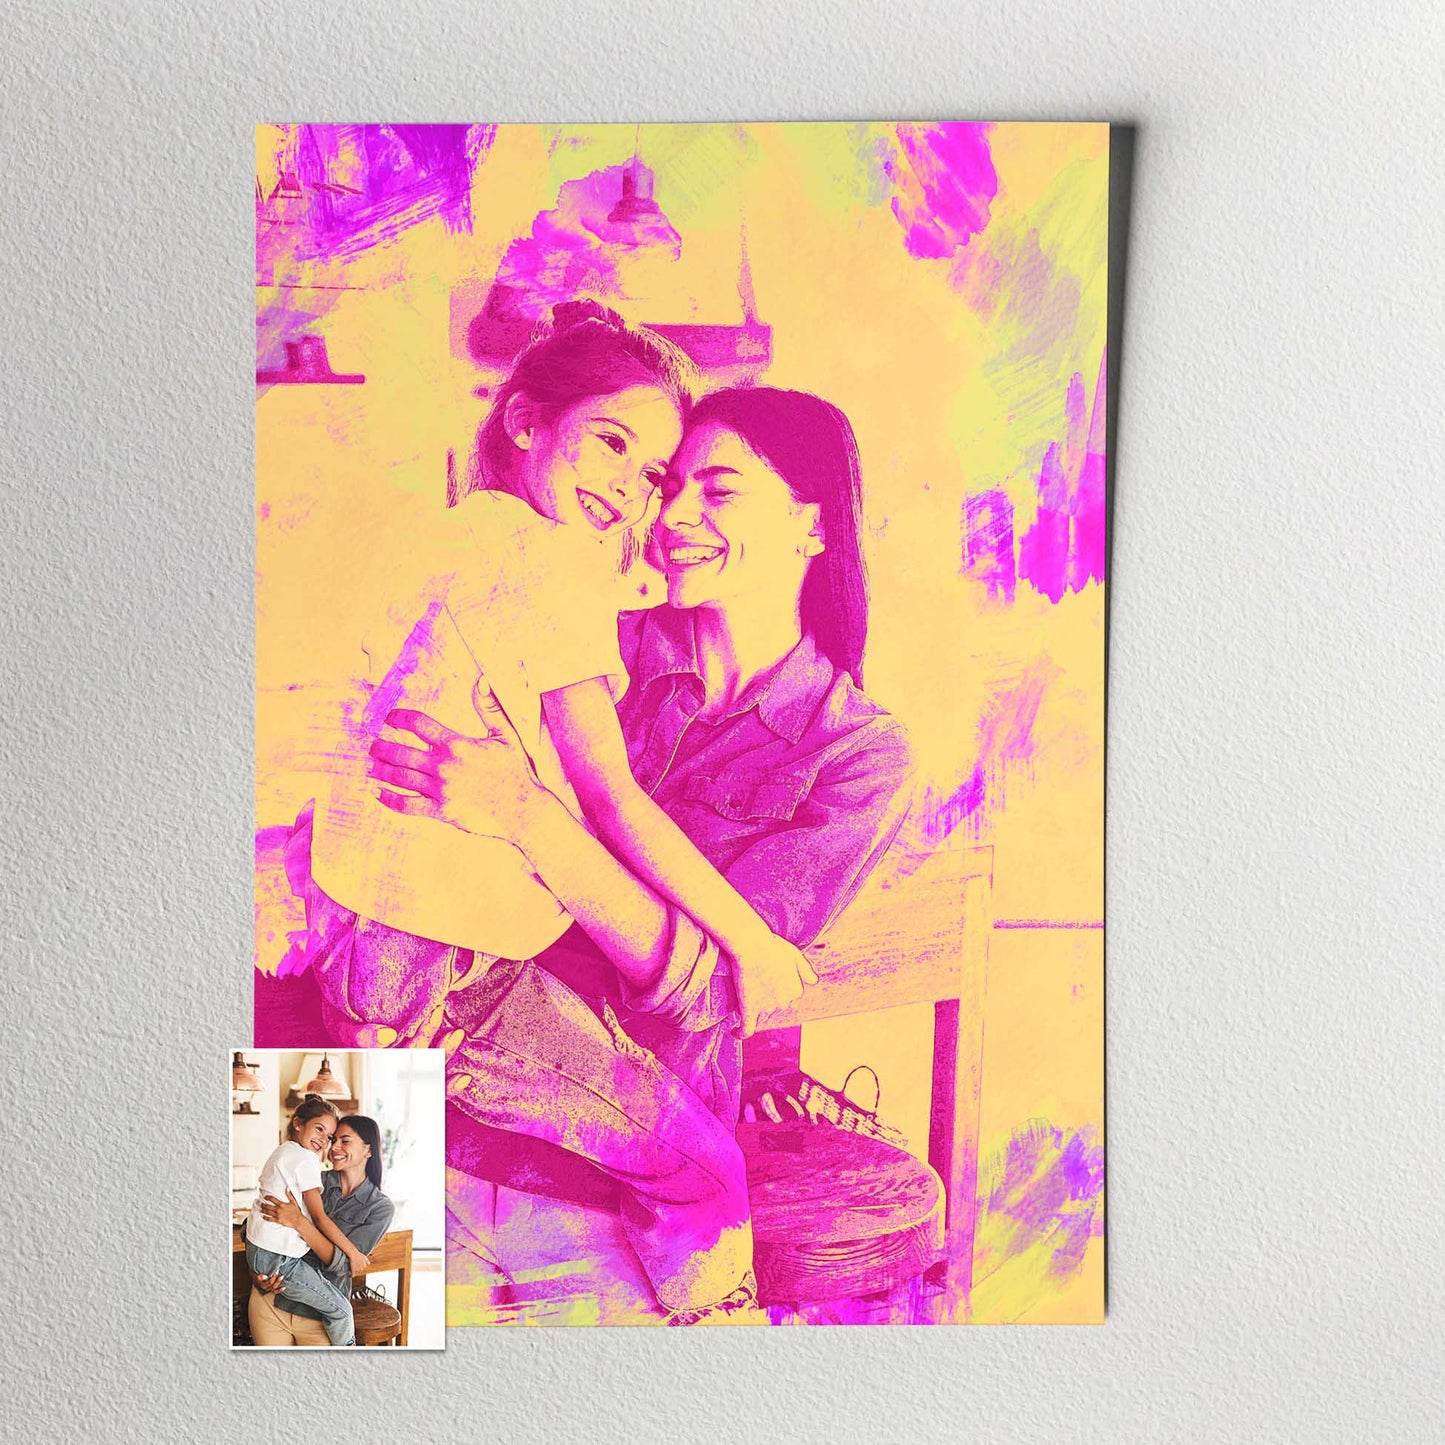 Personalised Pink & Yellow Watercolor Print: Turn your photo into a fun and exciting work of art with our realistic traditional watercolor style. The pink and yellow hues bring a sunny and joyful atmosphere, evoking smiles and comfort